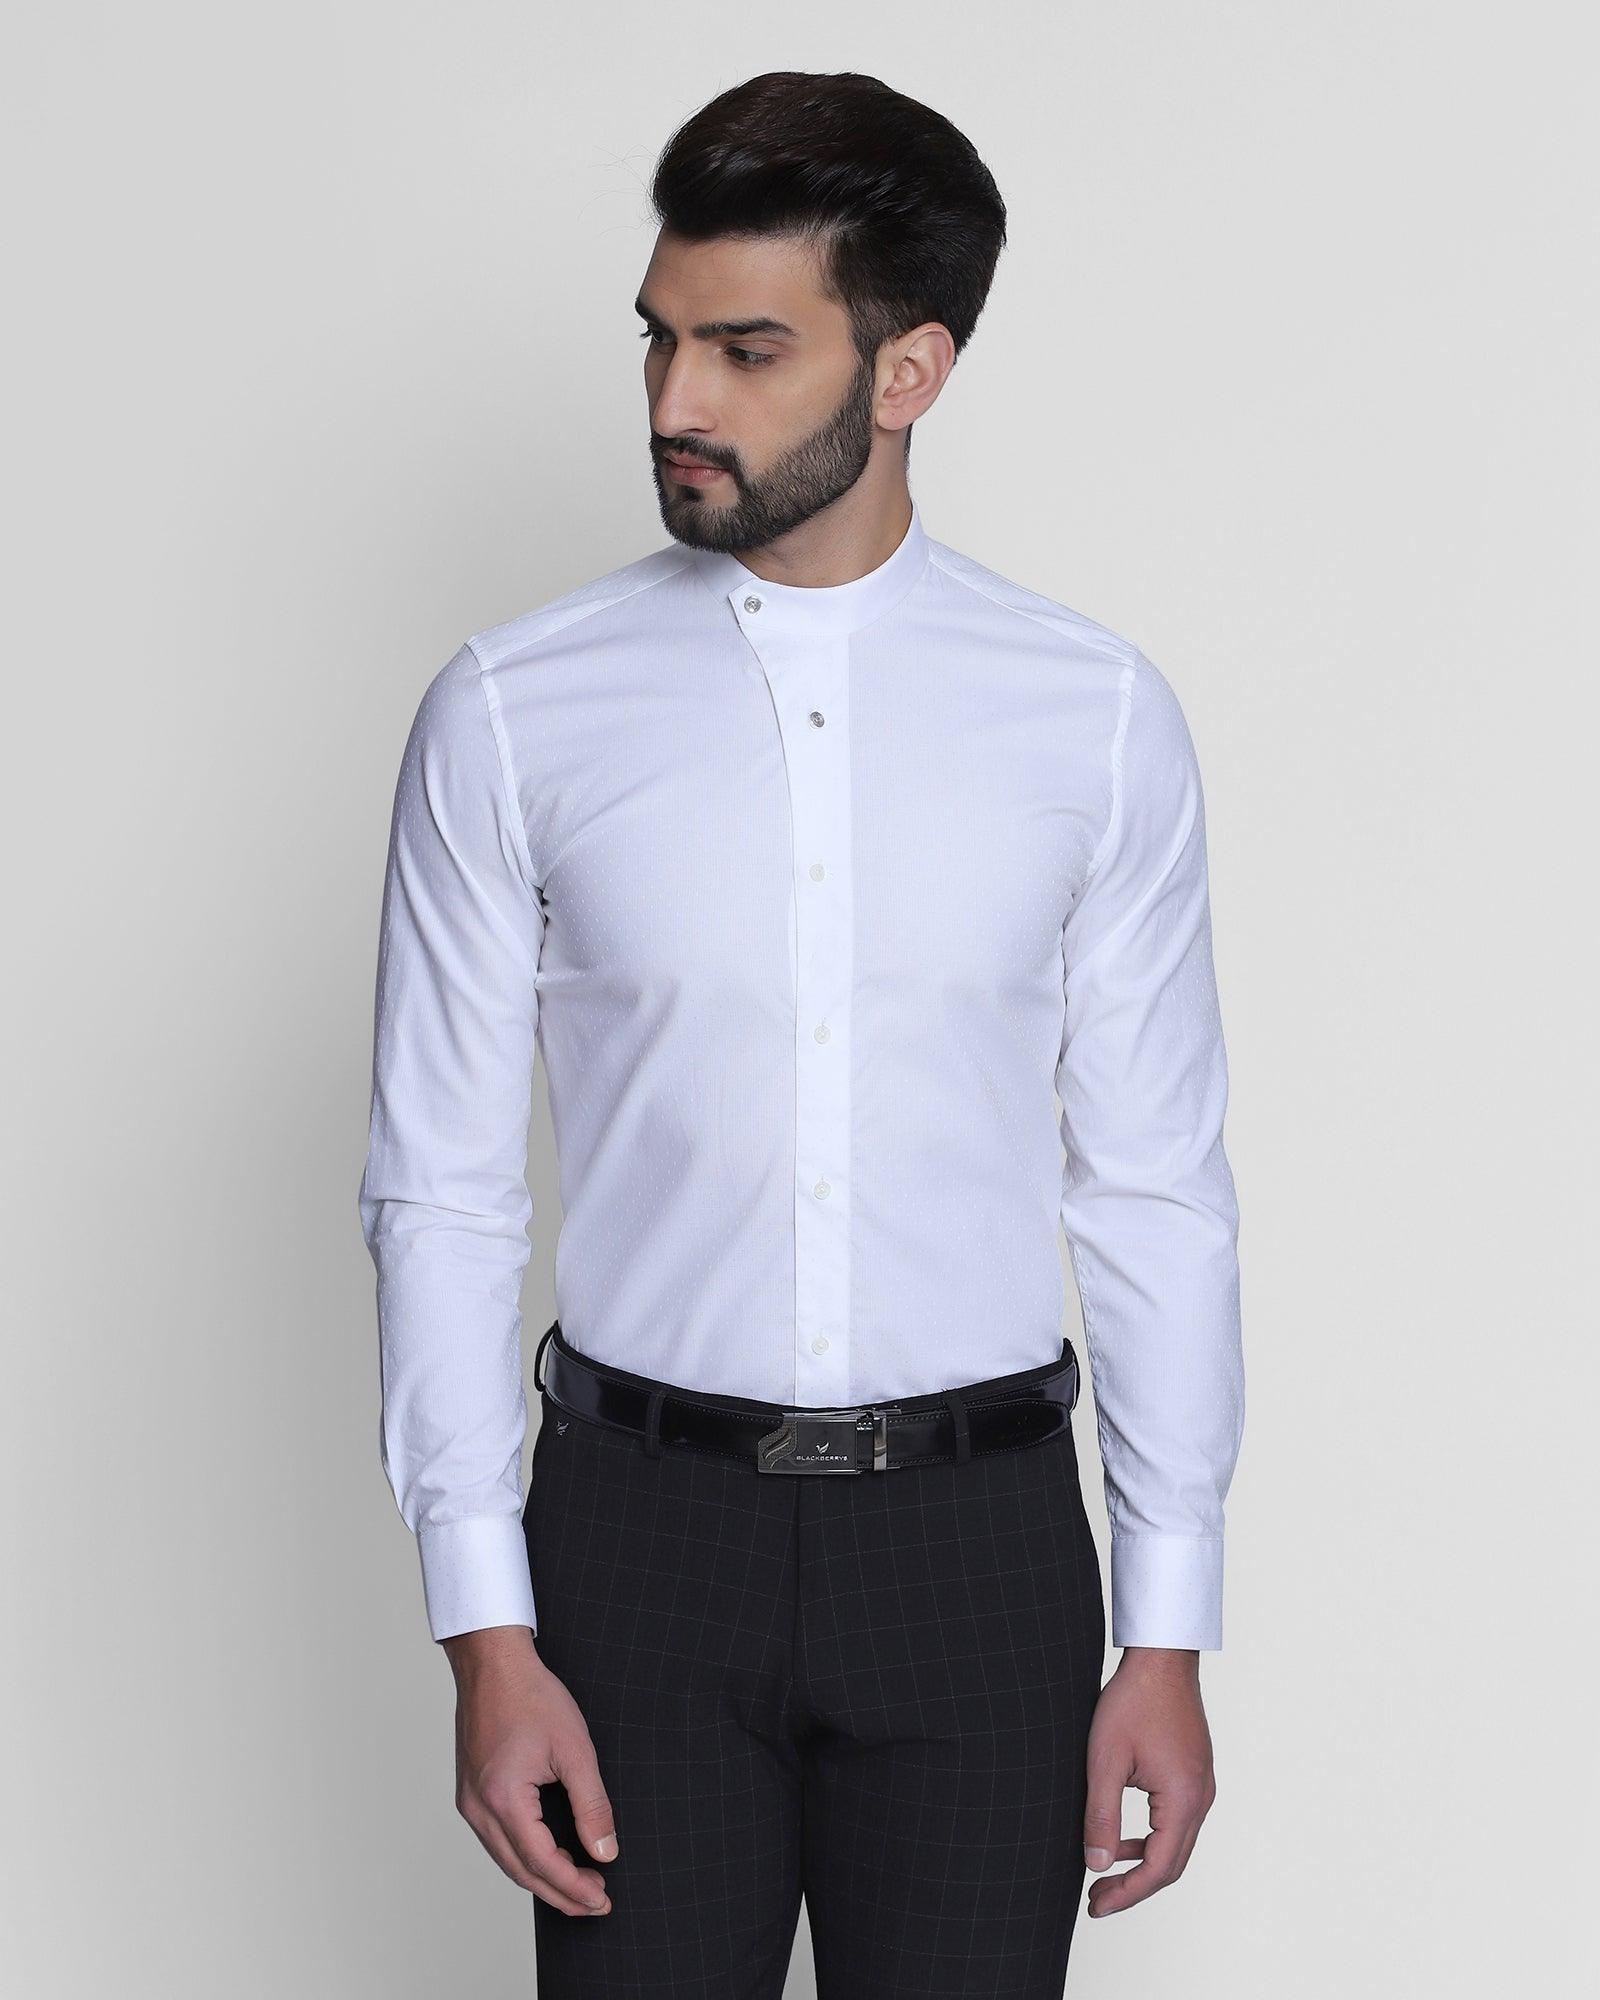 textured formal shirt in white (sketch)